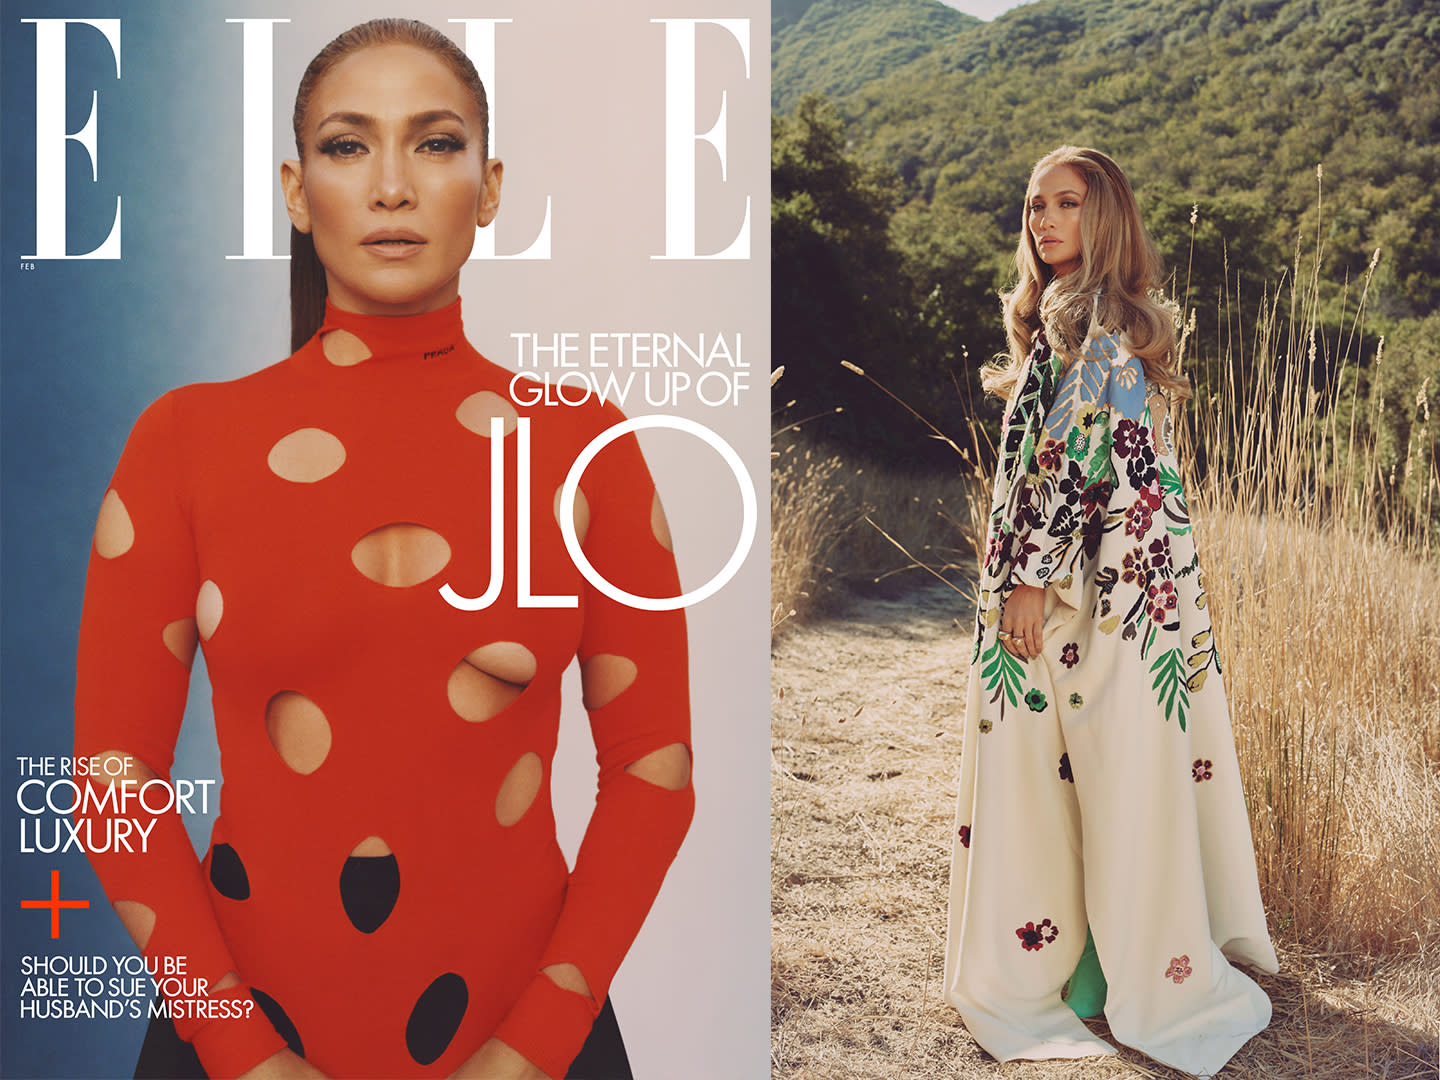 Jennifer Lopez recalls the moment when she realized that she raised “conscious” children